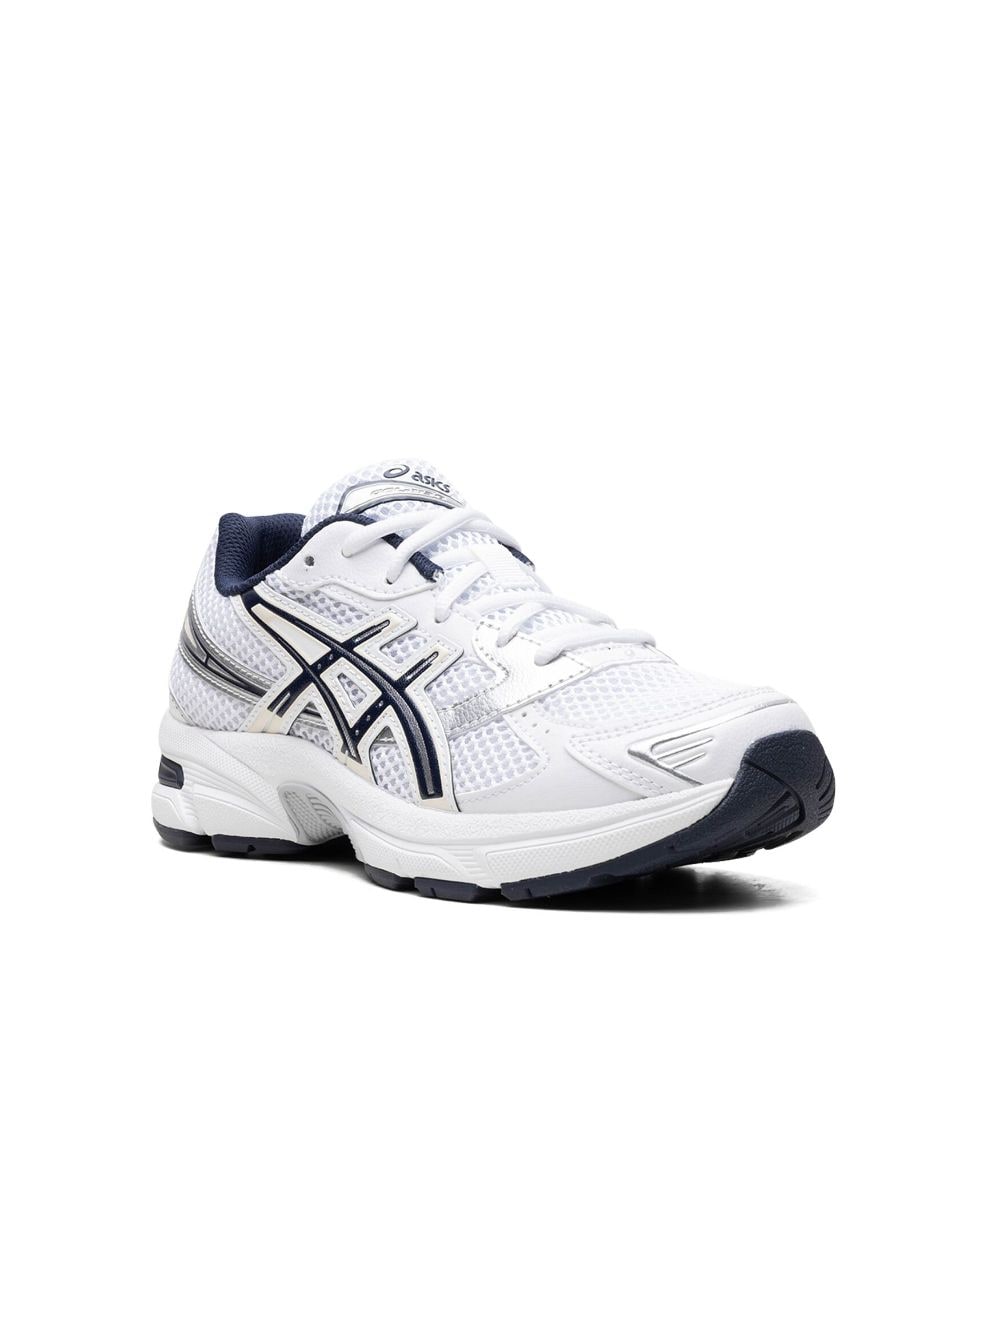 Asics Kids Gel-1130 lace-up sneakers White